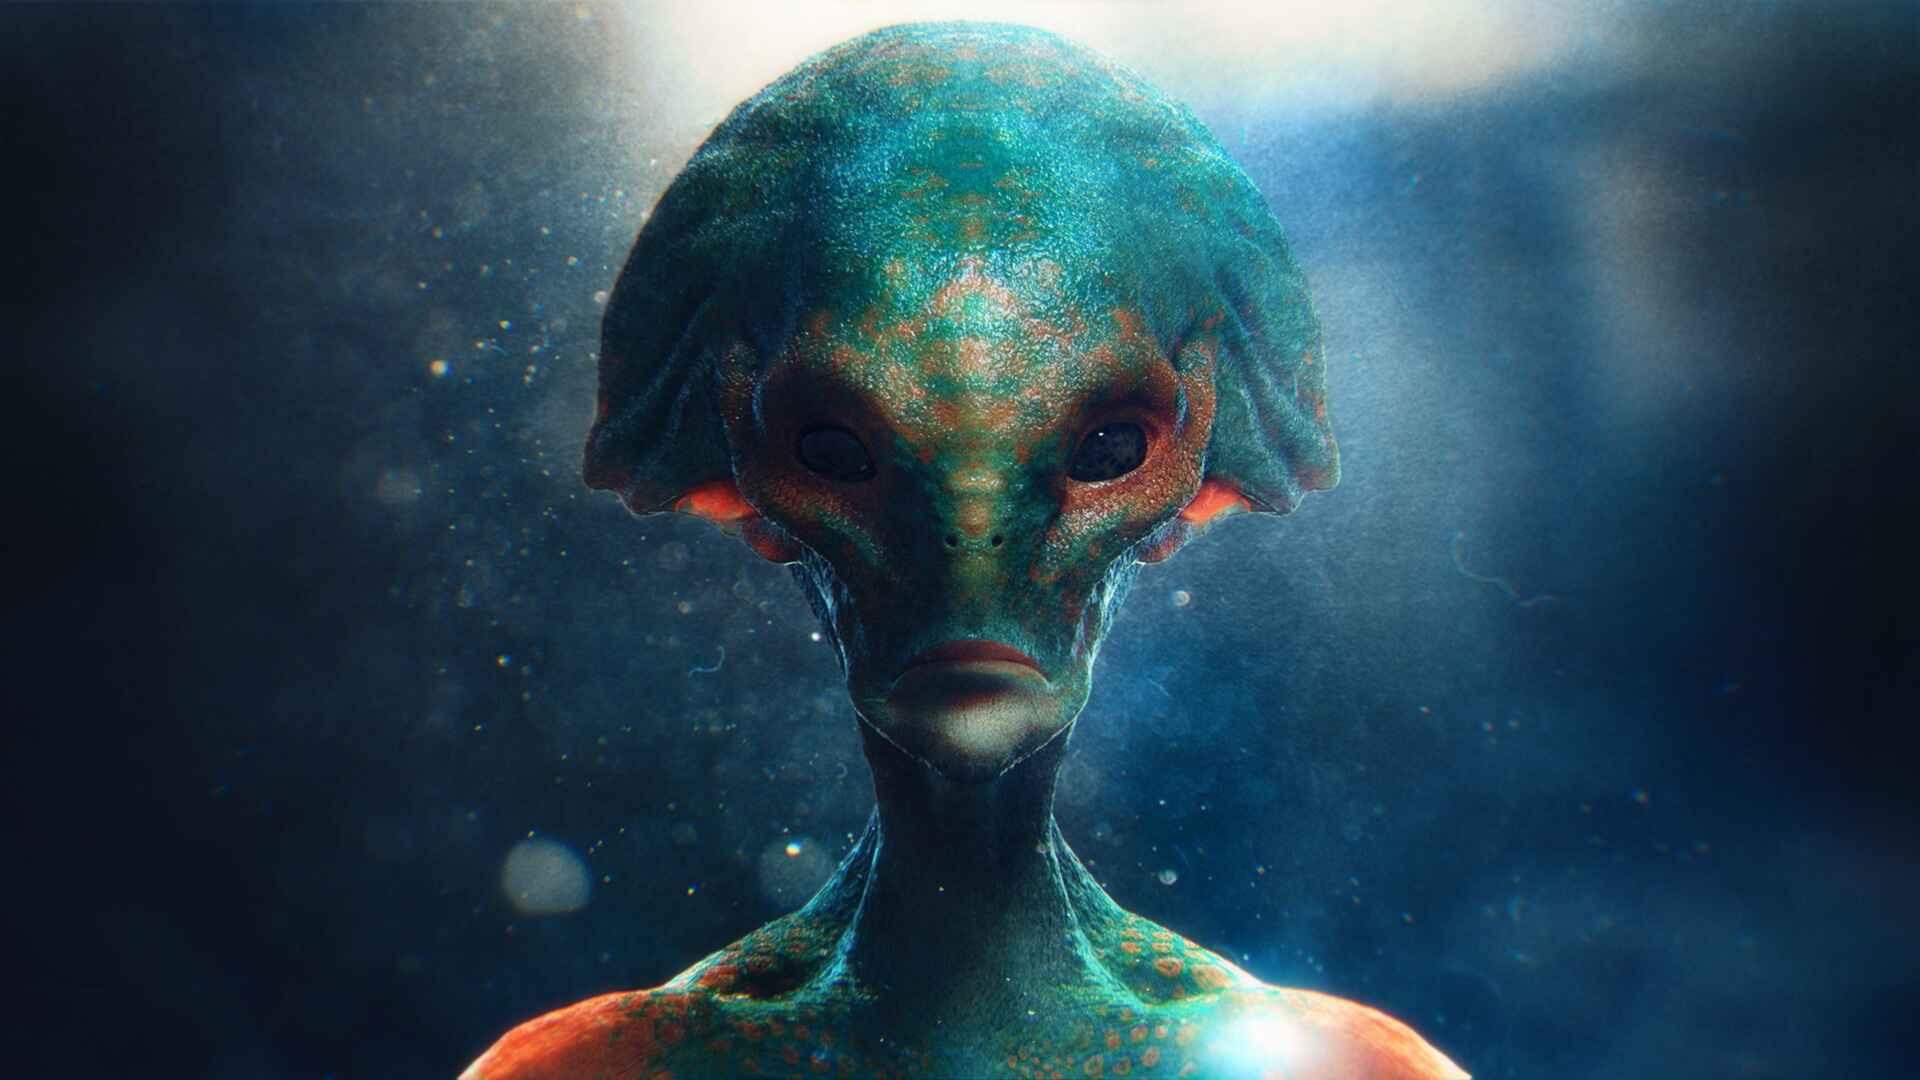 Illustration of an alien in a dream. This image is shown for those who are looking to understand the meaning of dreaming of an alien